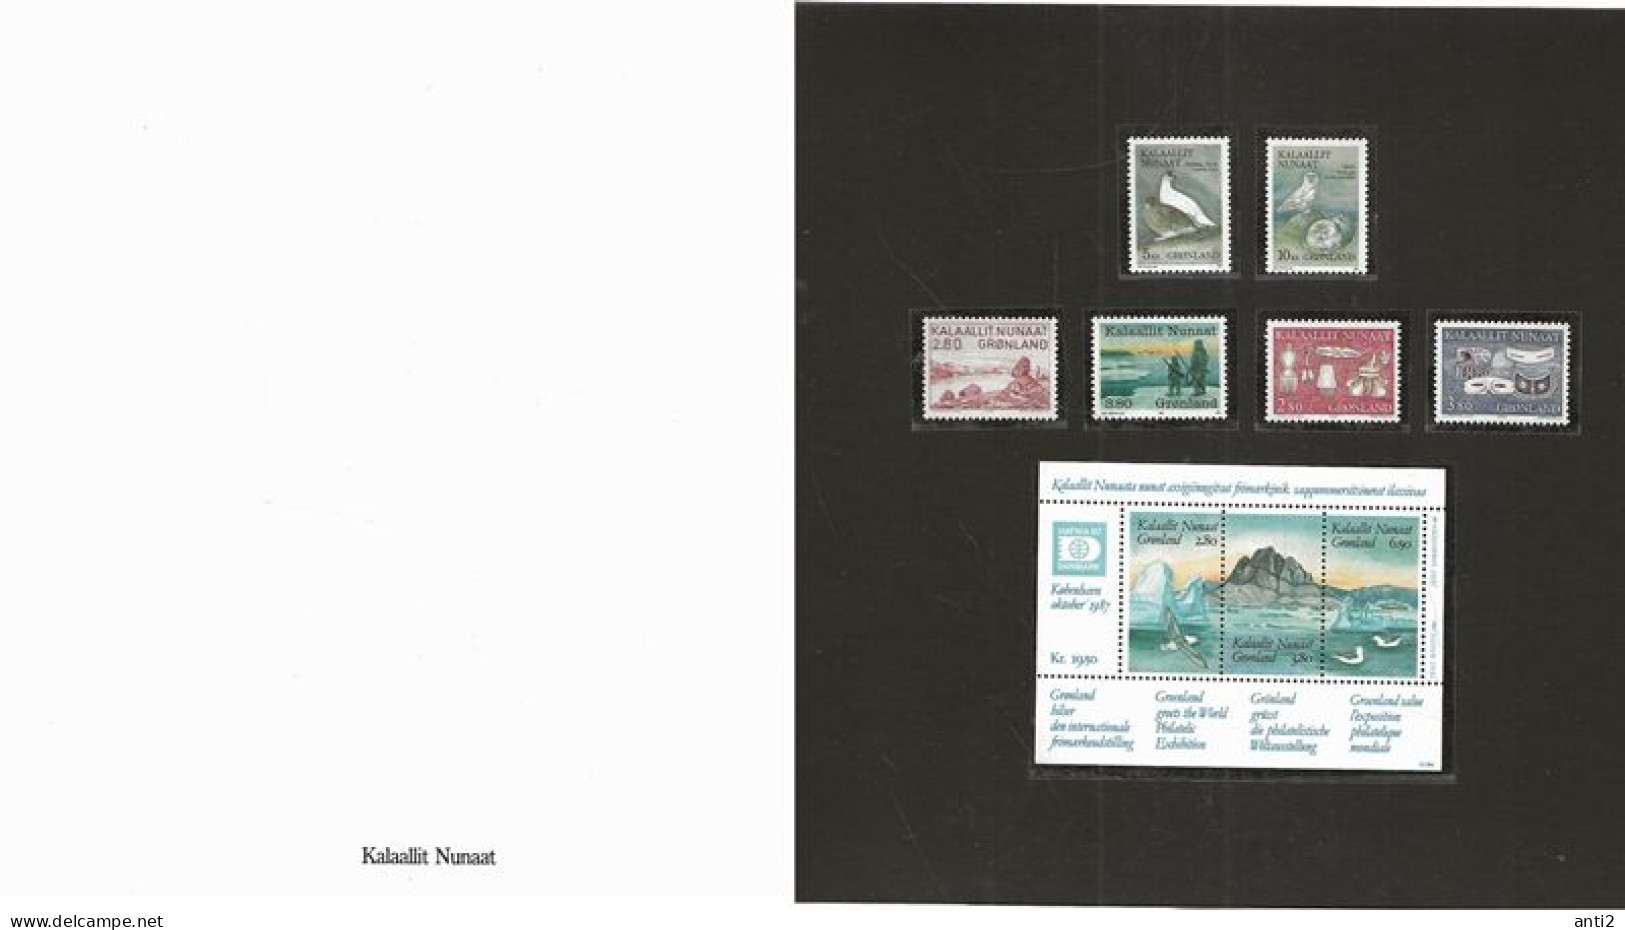 Greenland  1987  Folder With Stamps Issued 1987 Before The CEPT's 13. Conference In Copenhagen, Mint Stamps - Briefe U. Dokumente